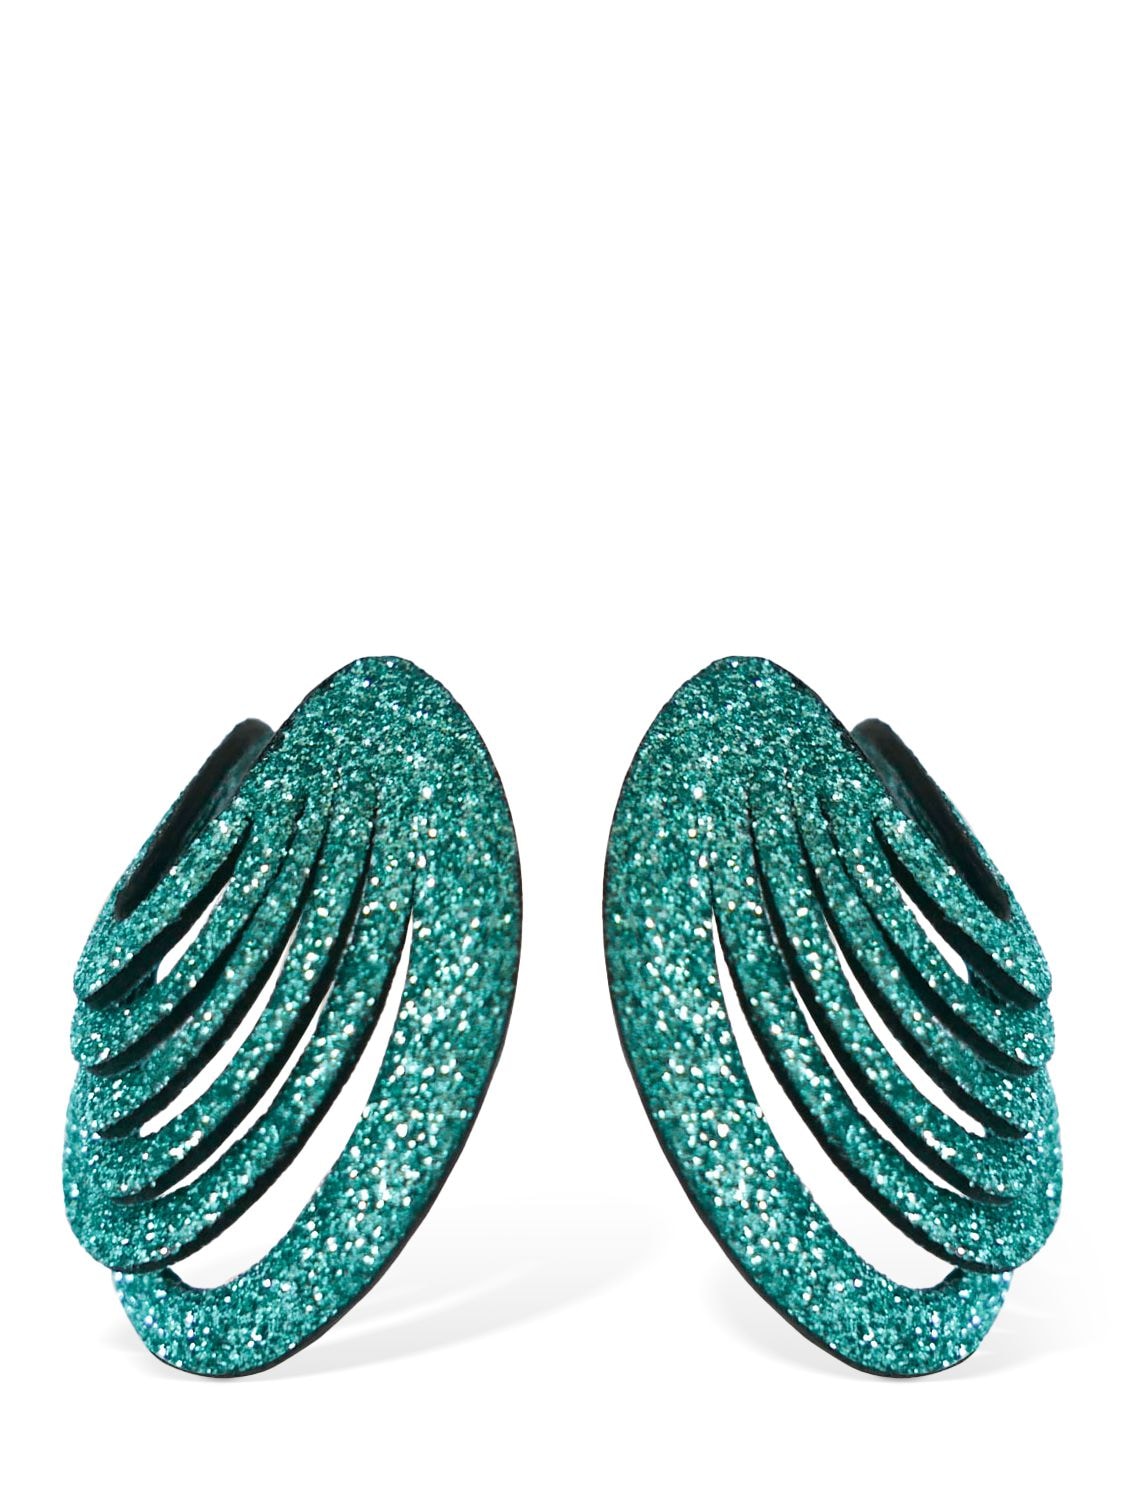 So-le Studio Lieve Leather Stud Earrings In Turquoise